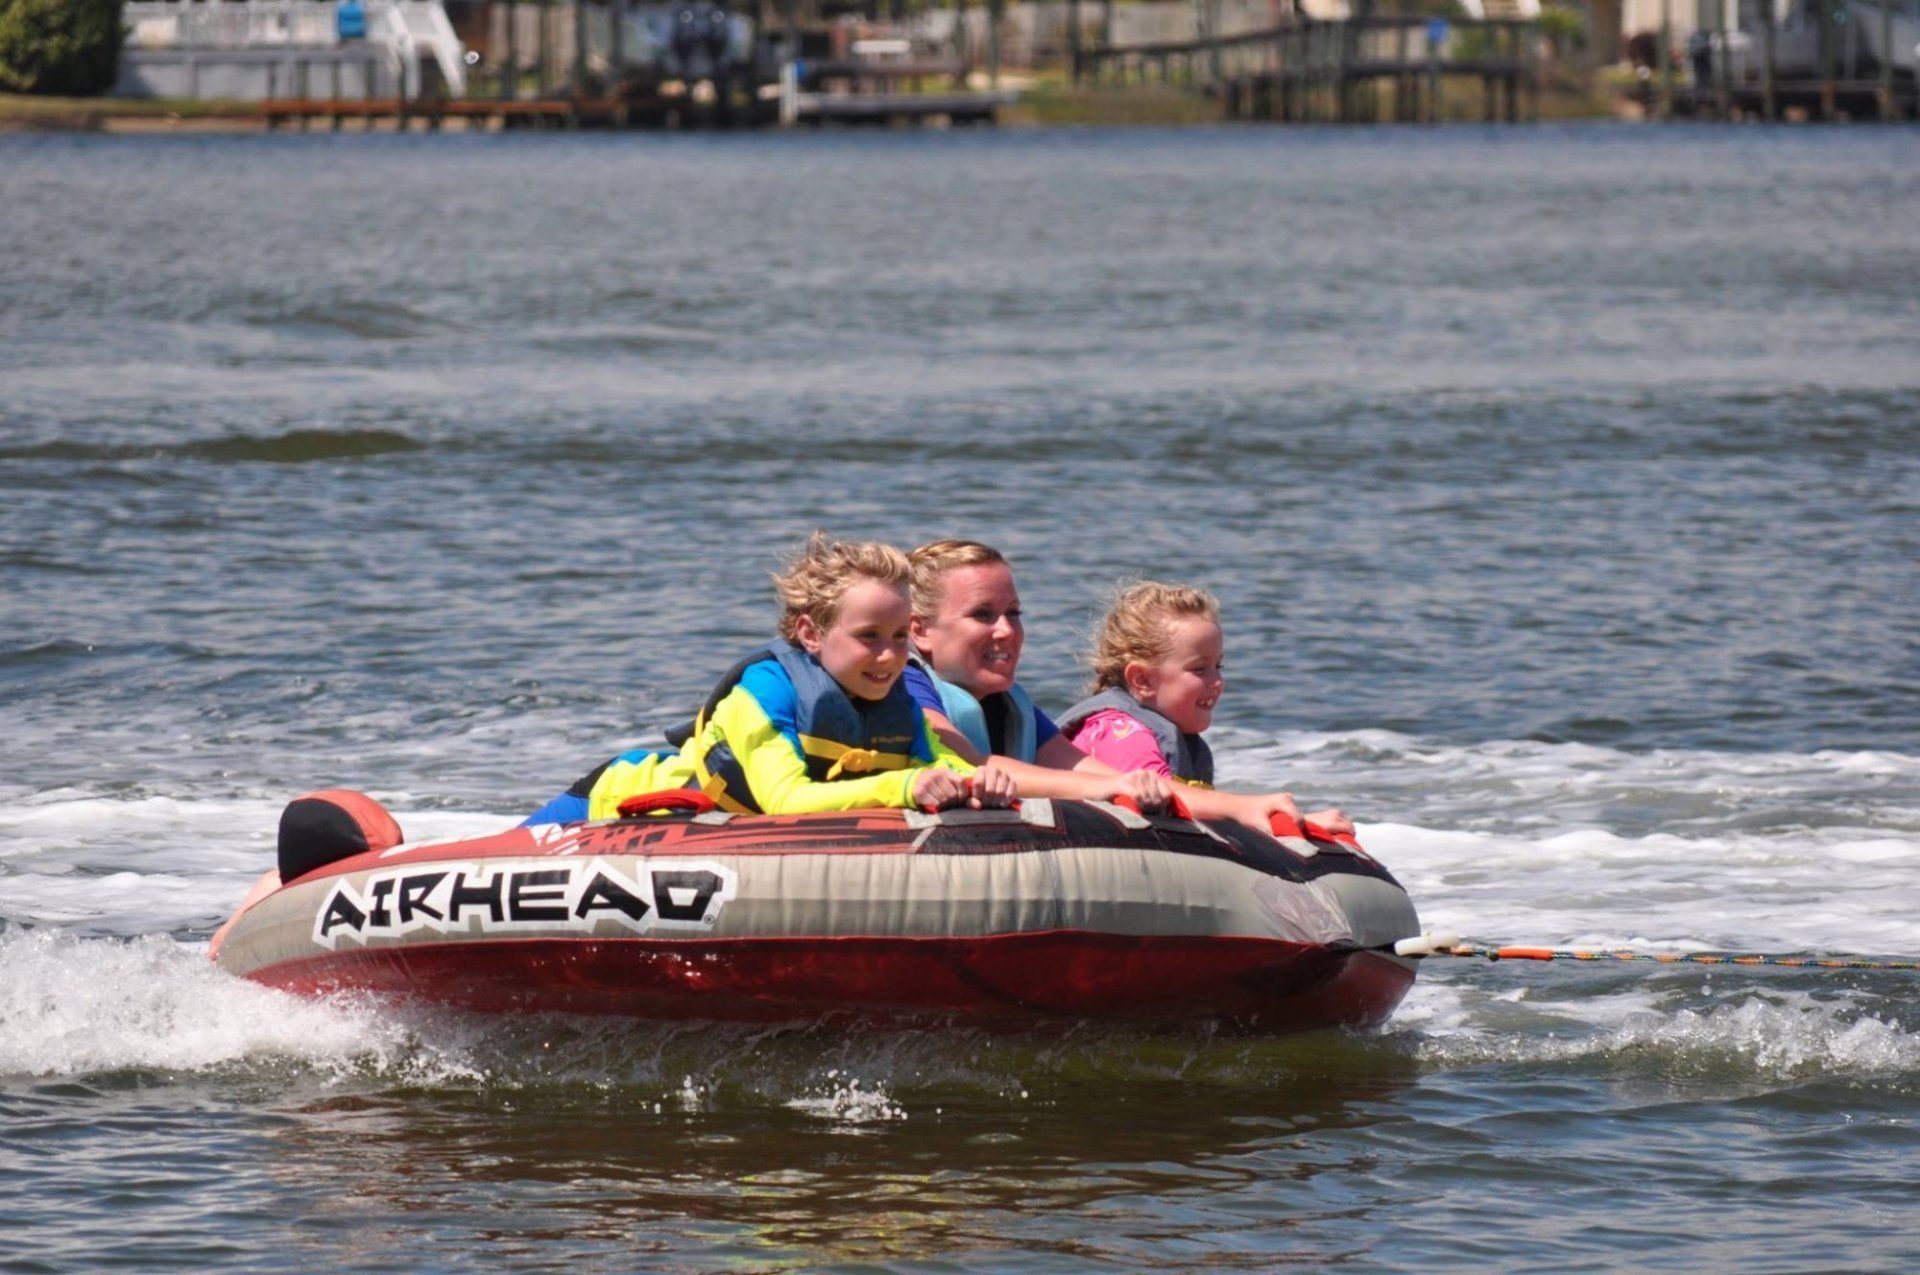 A group of people are riding a boat that says airhead on it